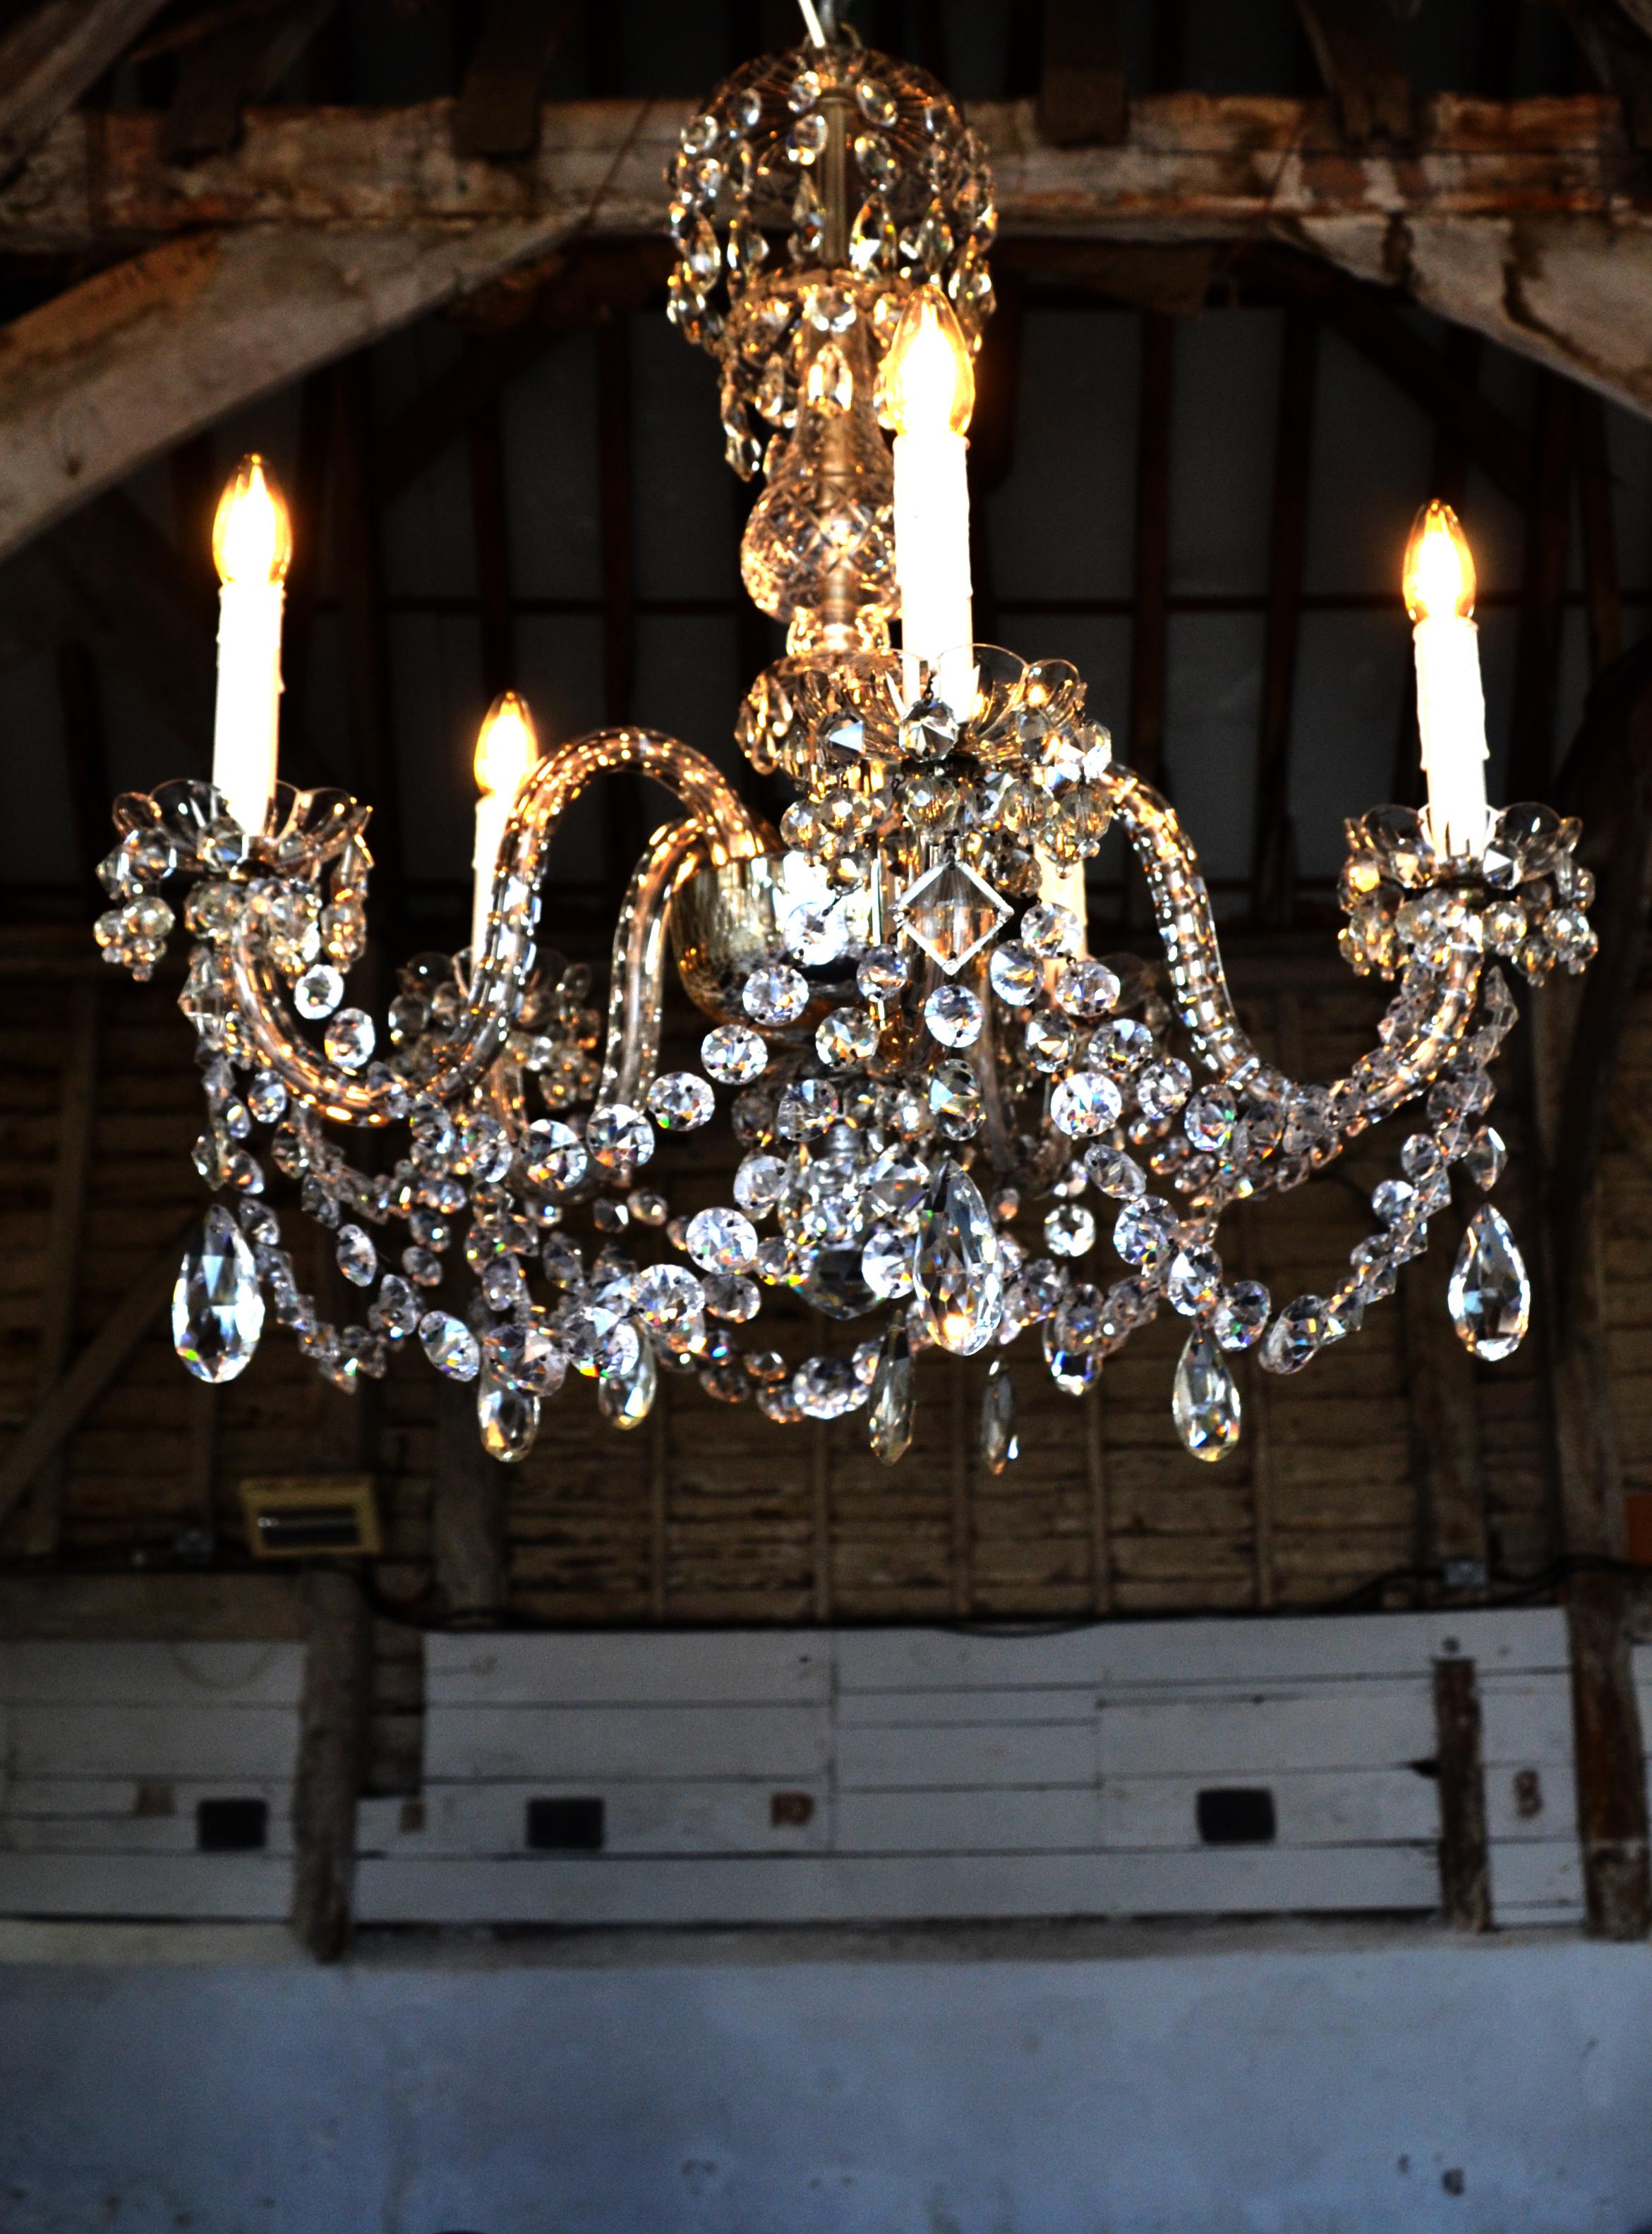 A very fine pair of late Victorian Circa 1870, hand blown and finest Old English cut crystal 5 light chandeliers with silver plated fixtures. They have been sympathetically converted to electricity no holes have been drilled, re-wired and accept 5 x